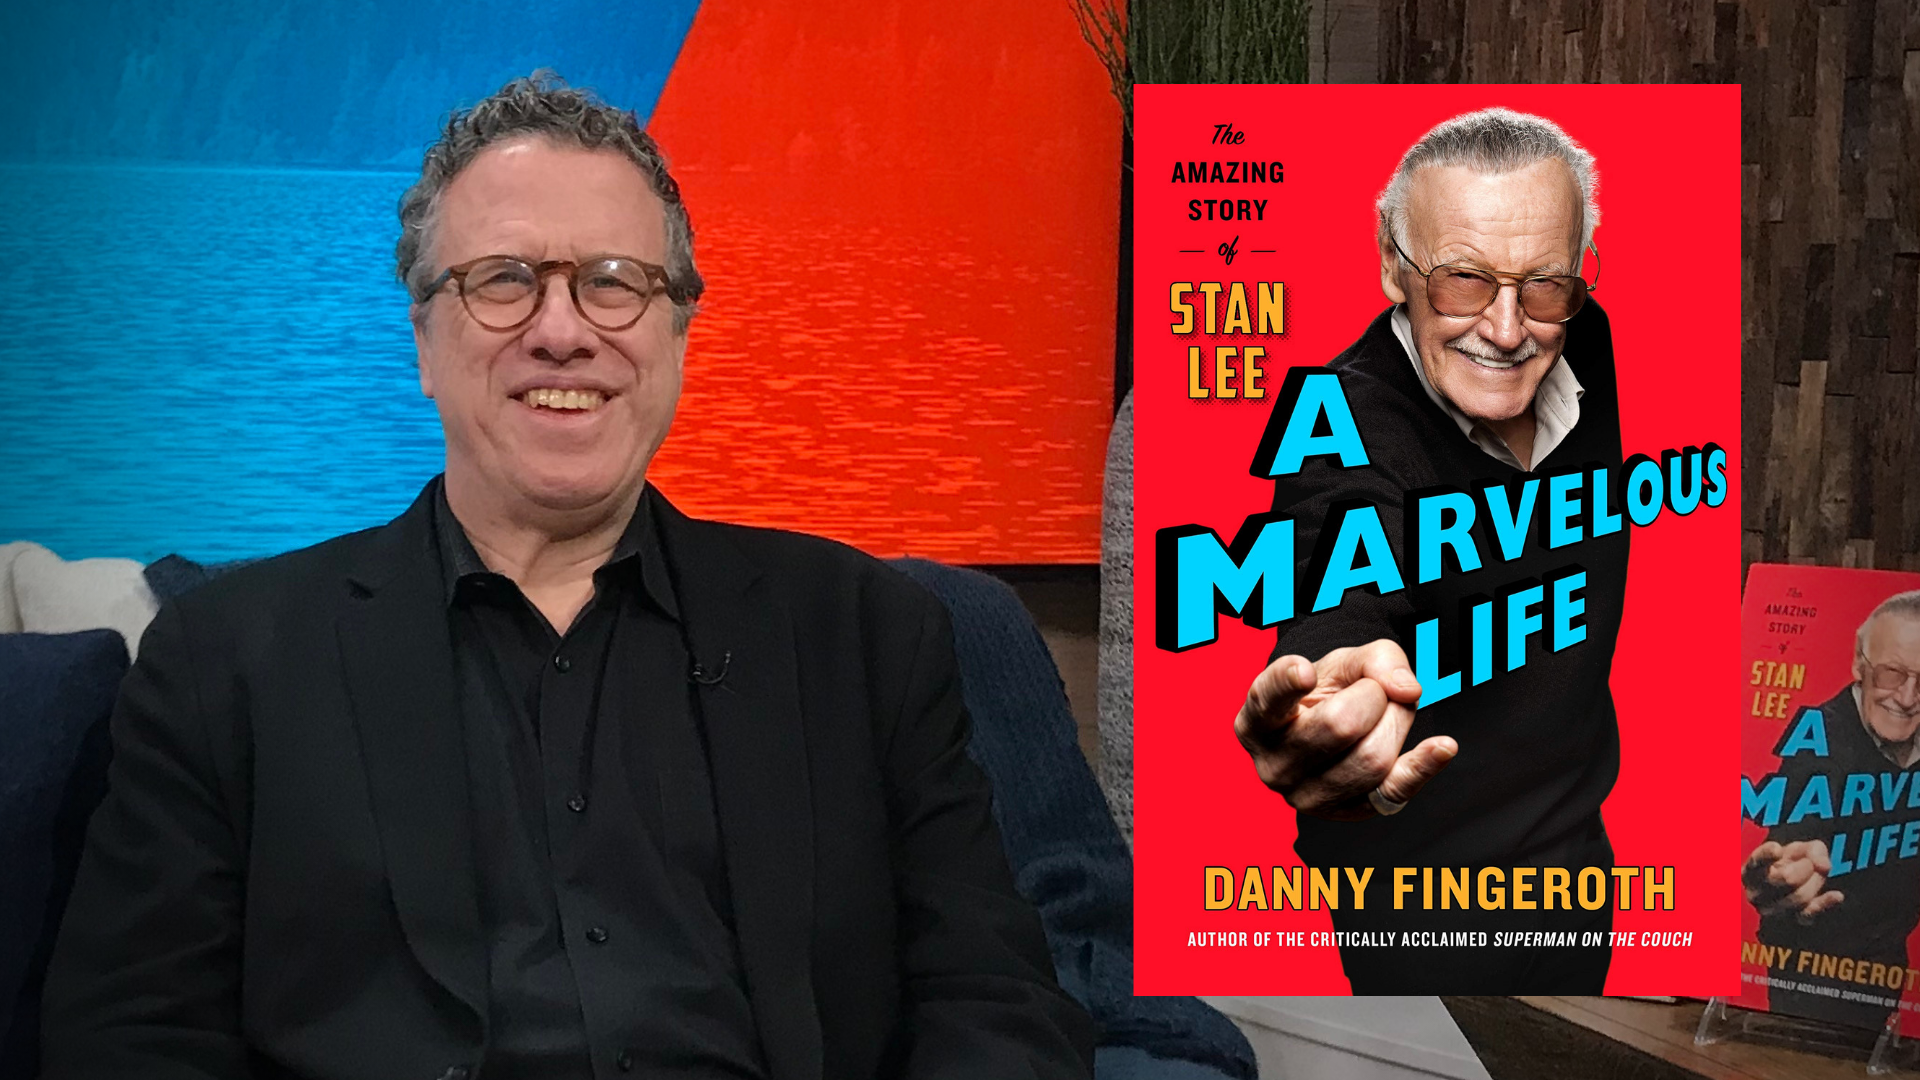 Author Danny Fingeroth dives into the legendary comic book creator's career, both the good and the bad, in new book "A Marvelous Life."